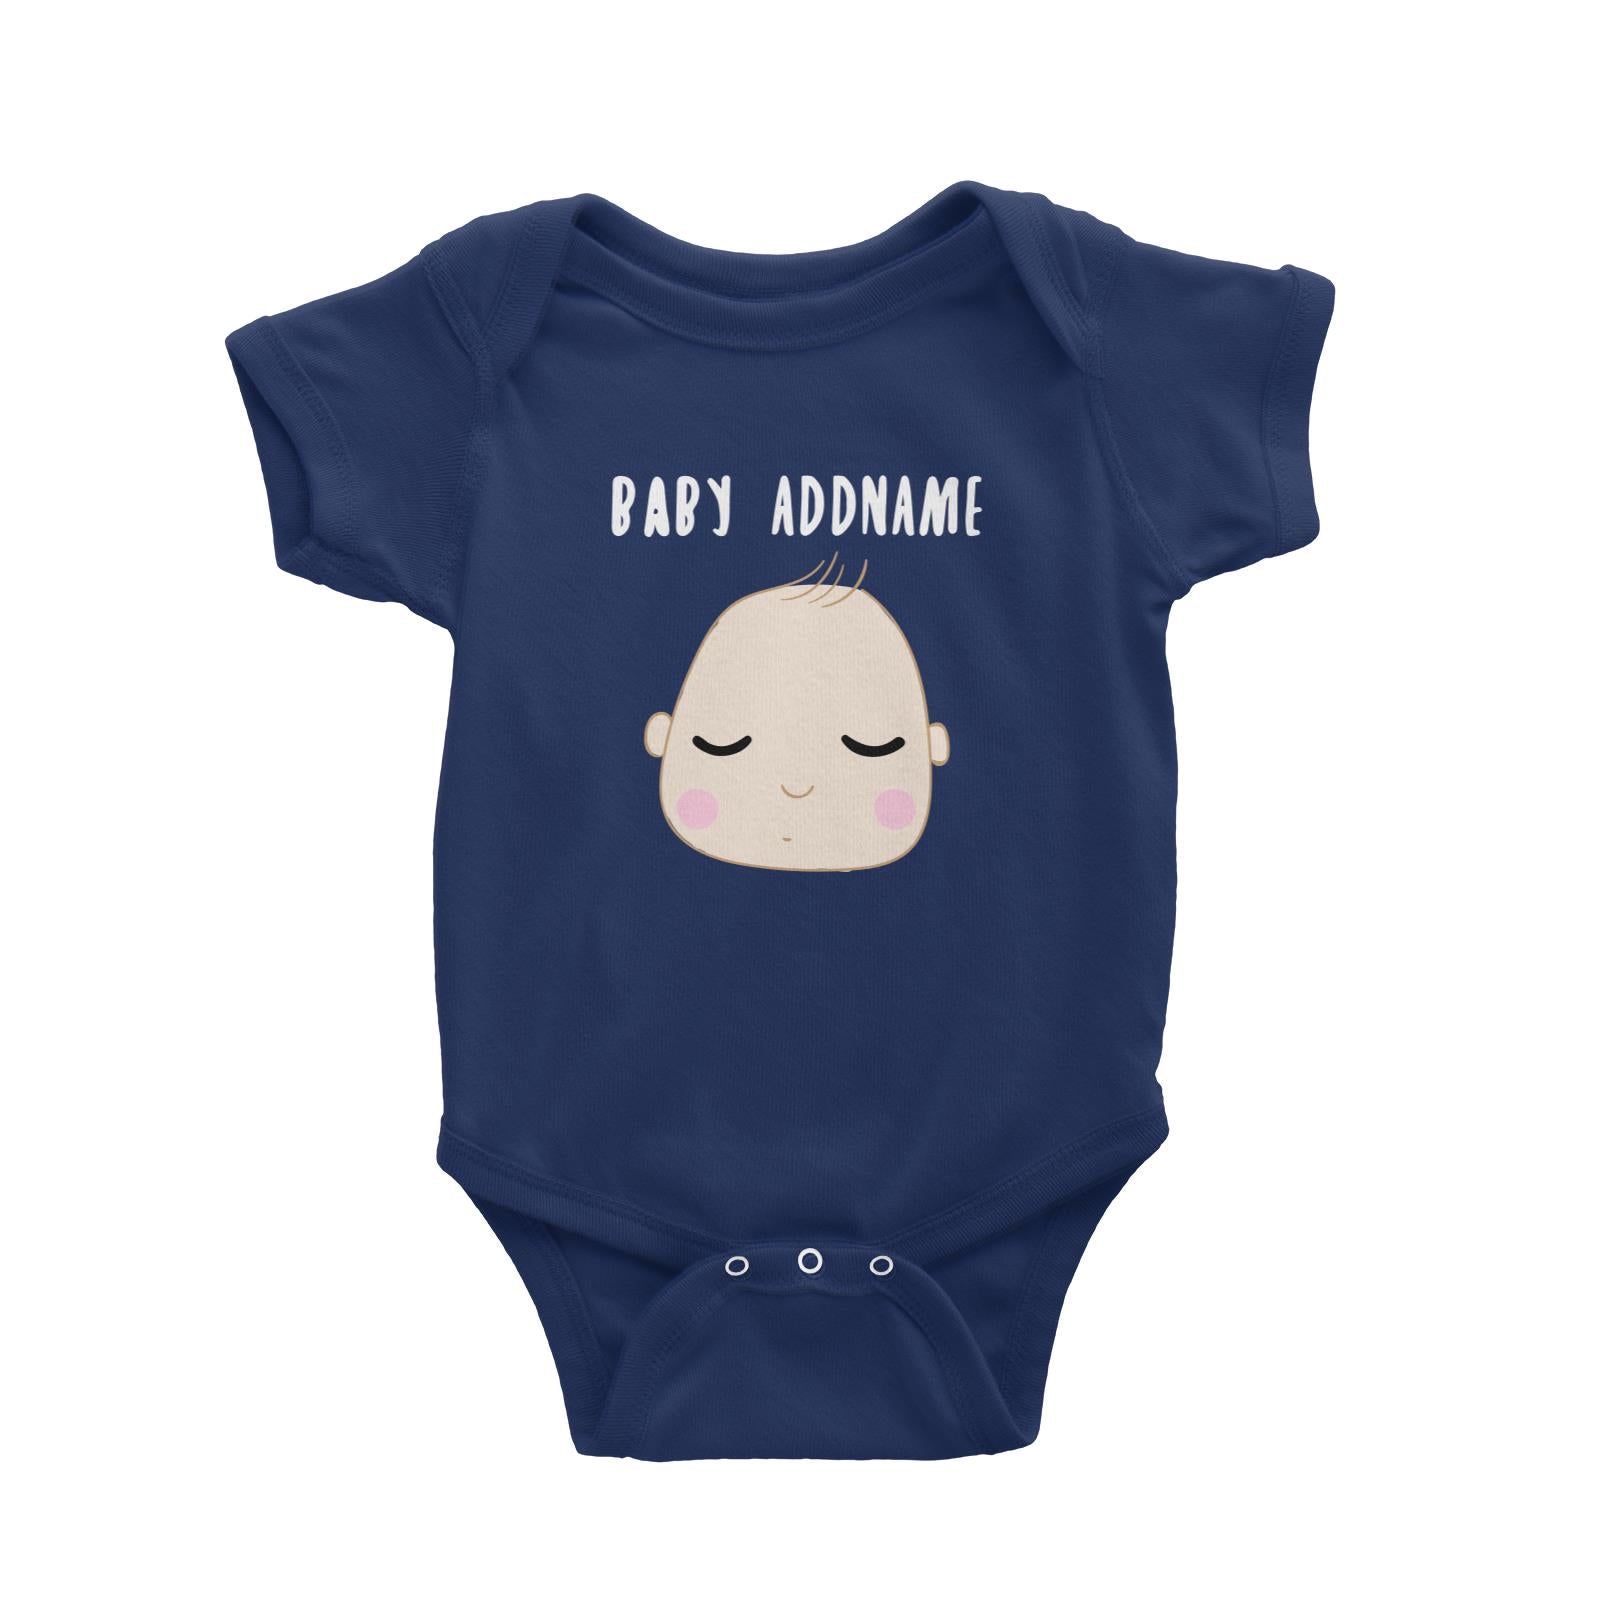 Cute Sleeping Baby Face Addname Baby Romper Personalizable Designs Basic Newborn